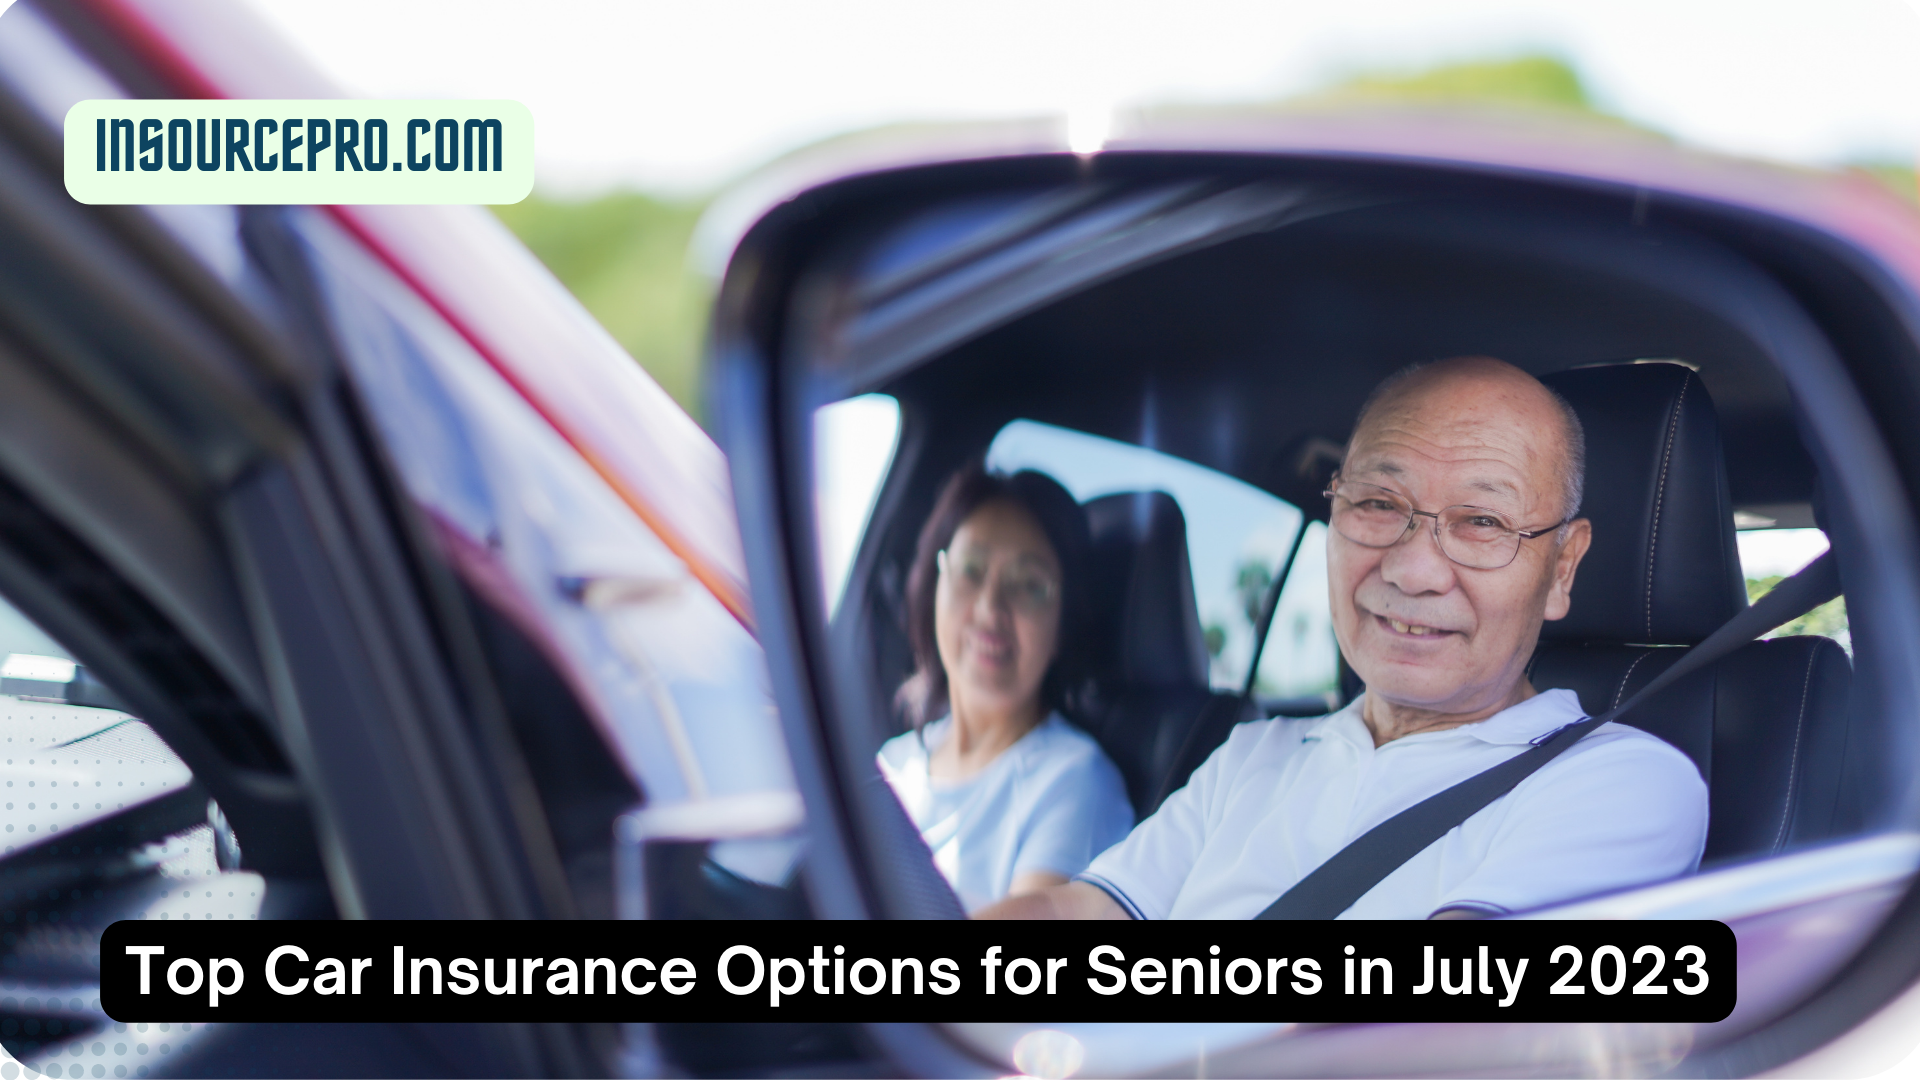 Top Car Insurance Options for Seniors in July 2023